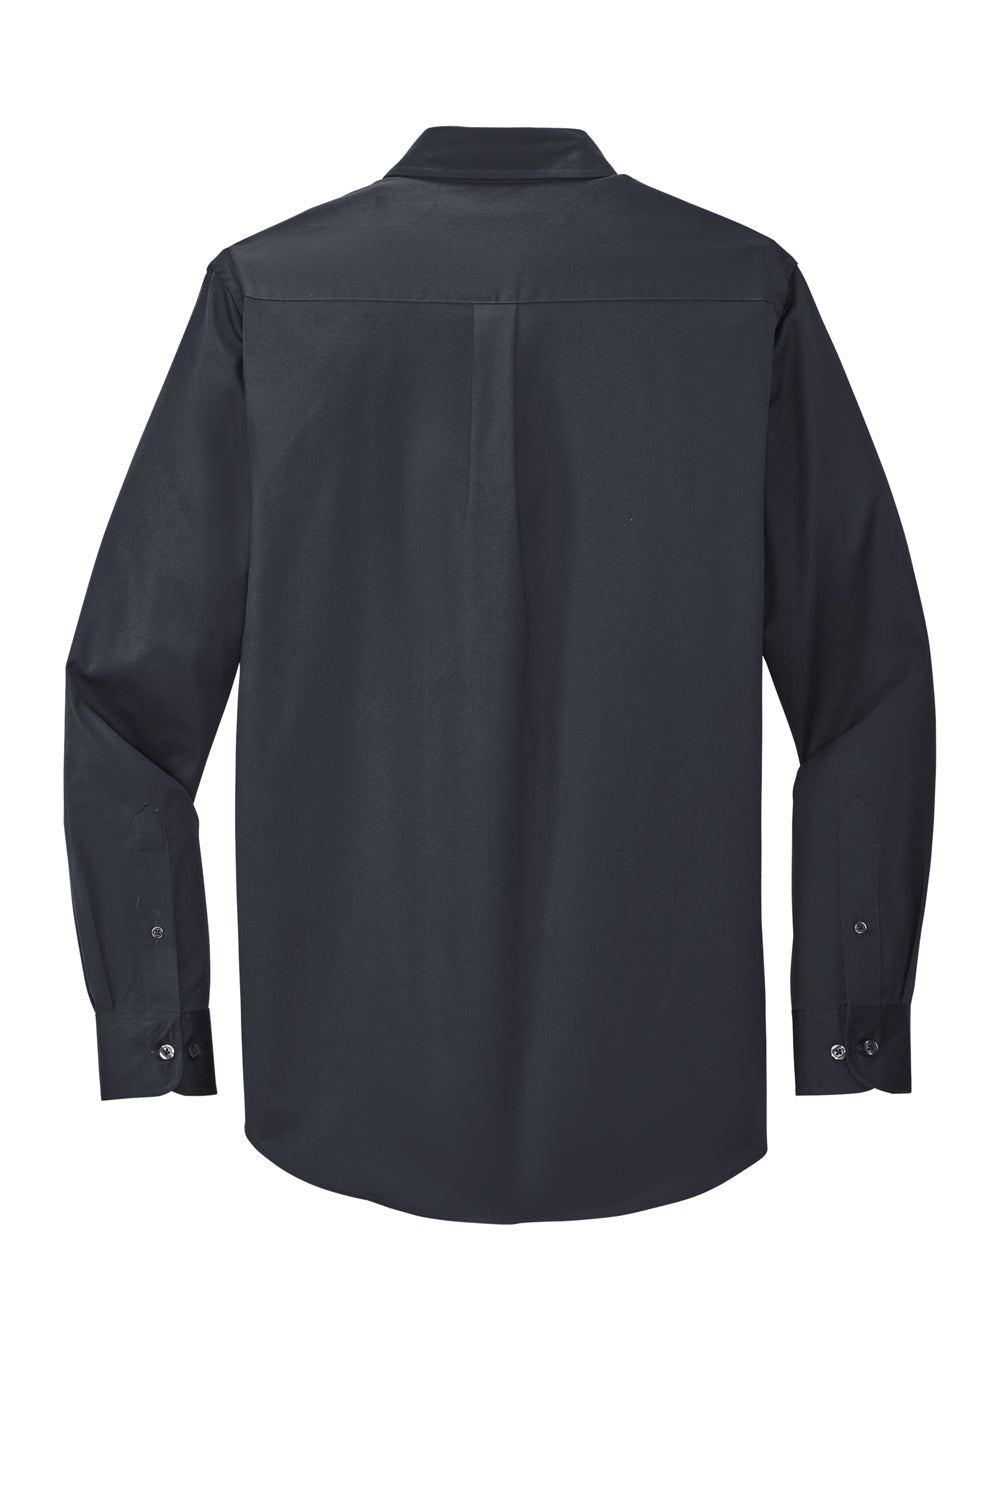 Port Authority S608/TLS608/S608ES Mens Easy Care Wrinkle Resistant Long Sleeve Button Down Shirt w/ Pocket Classic Navy Blue Flat Back